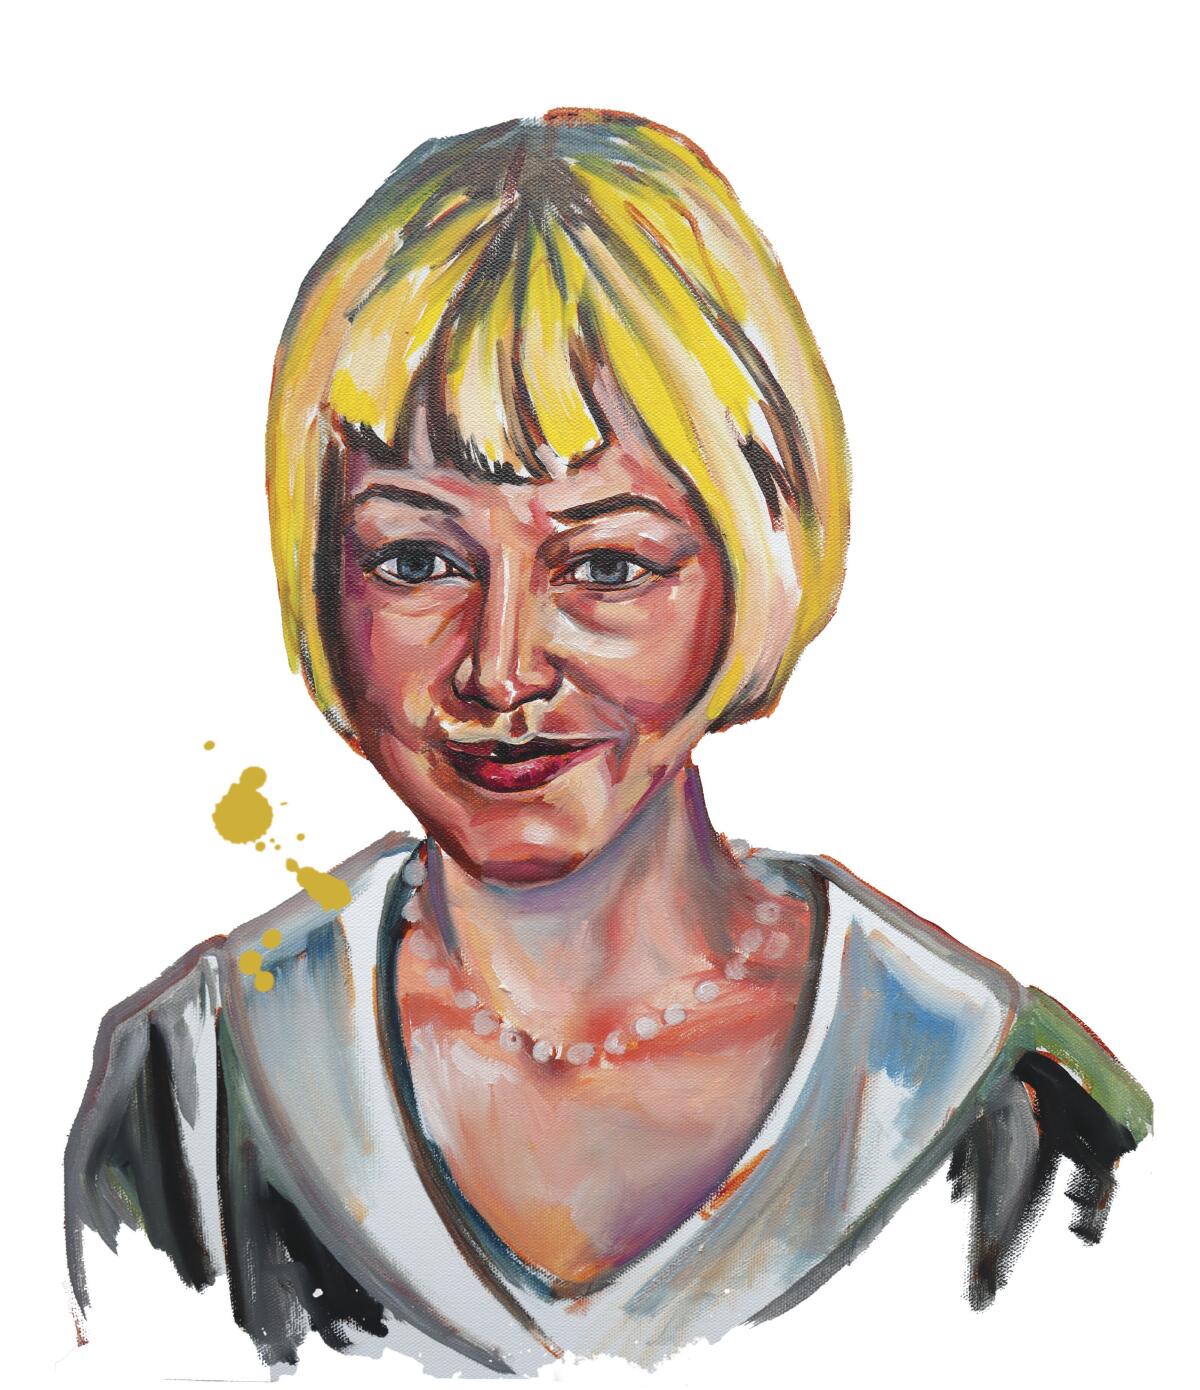 An illustration of actor Michelle Williams